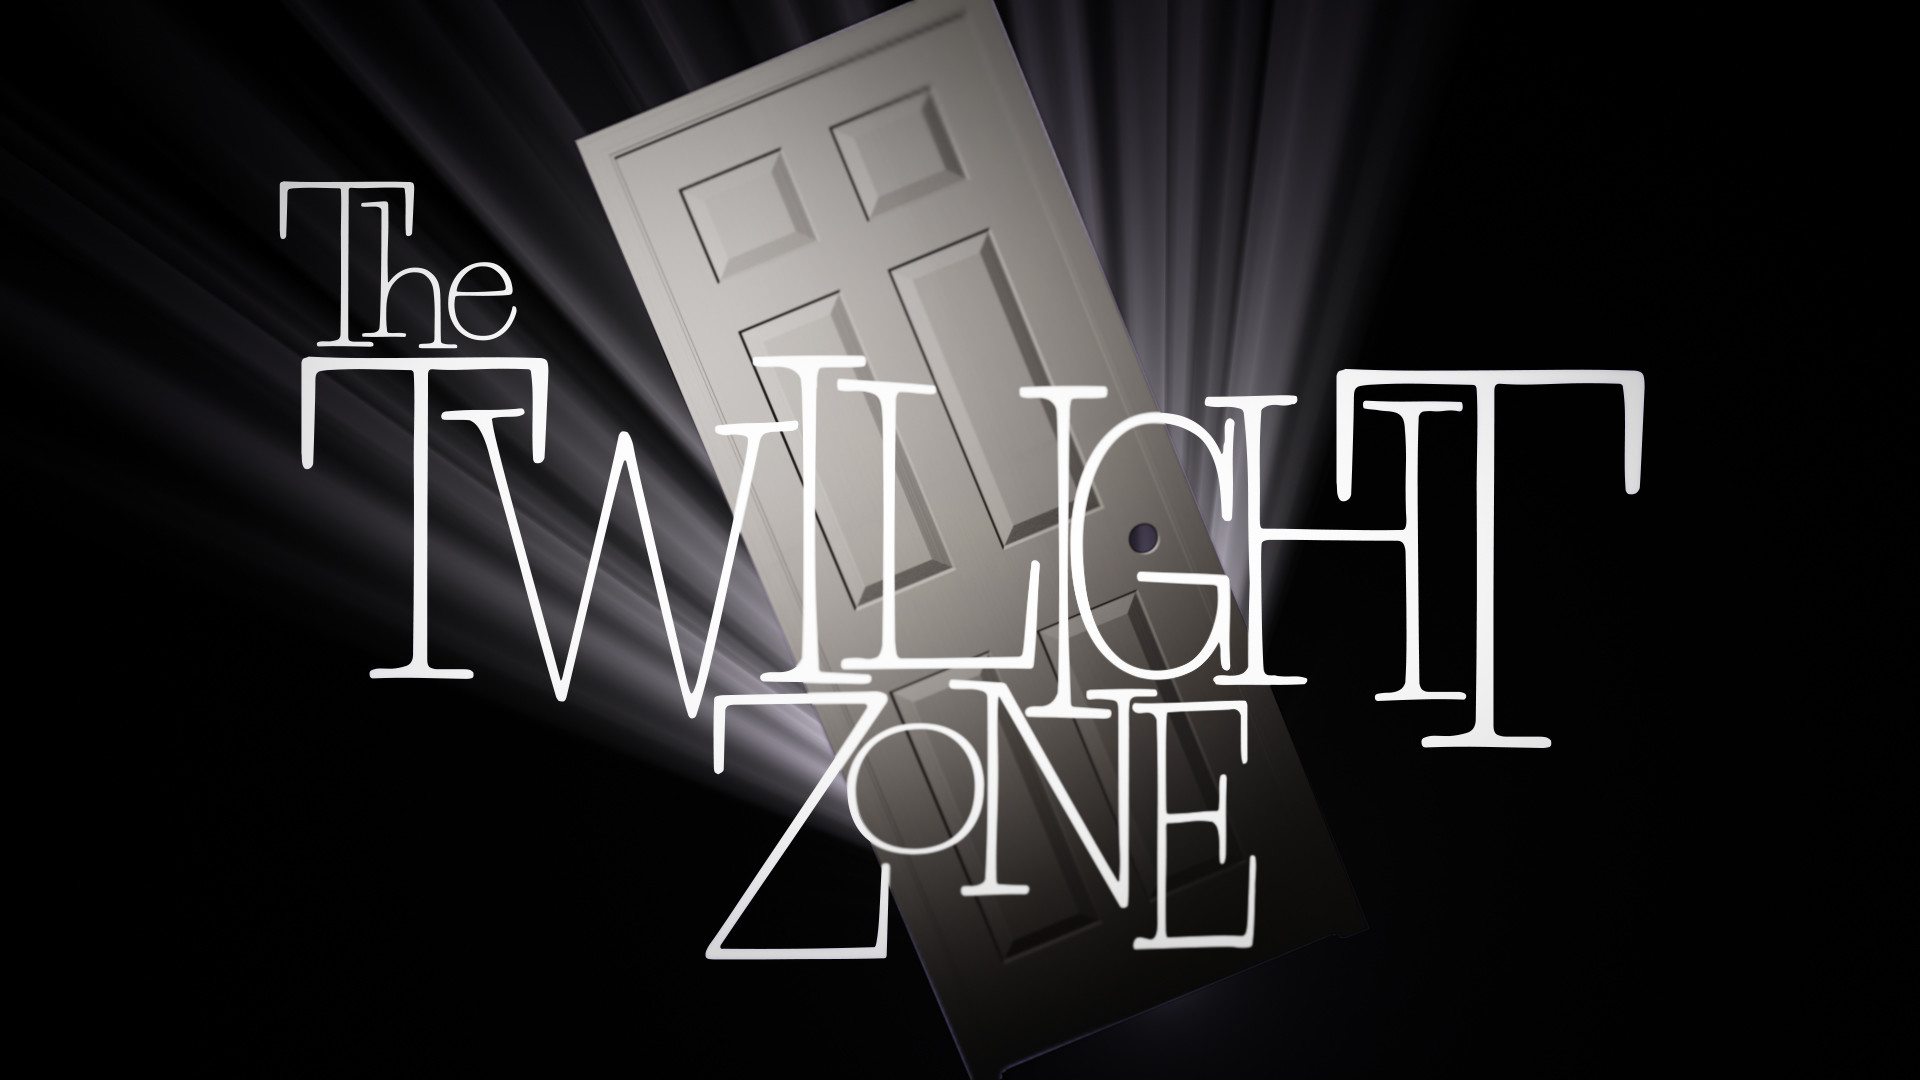 1920x1080 the_twilight_zone_door_logo_by_timcreed-d6l32y5